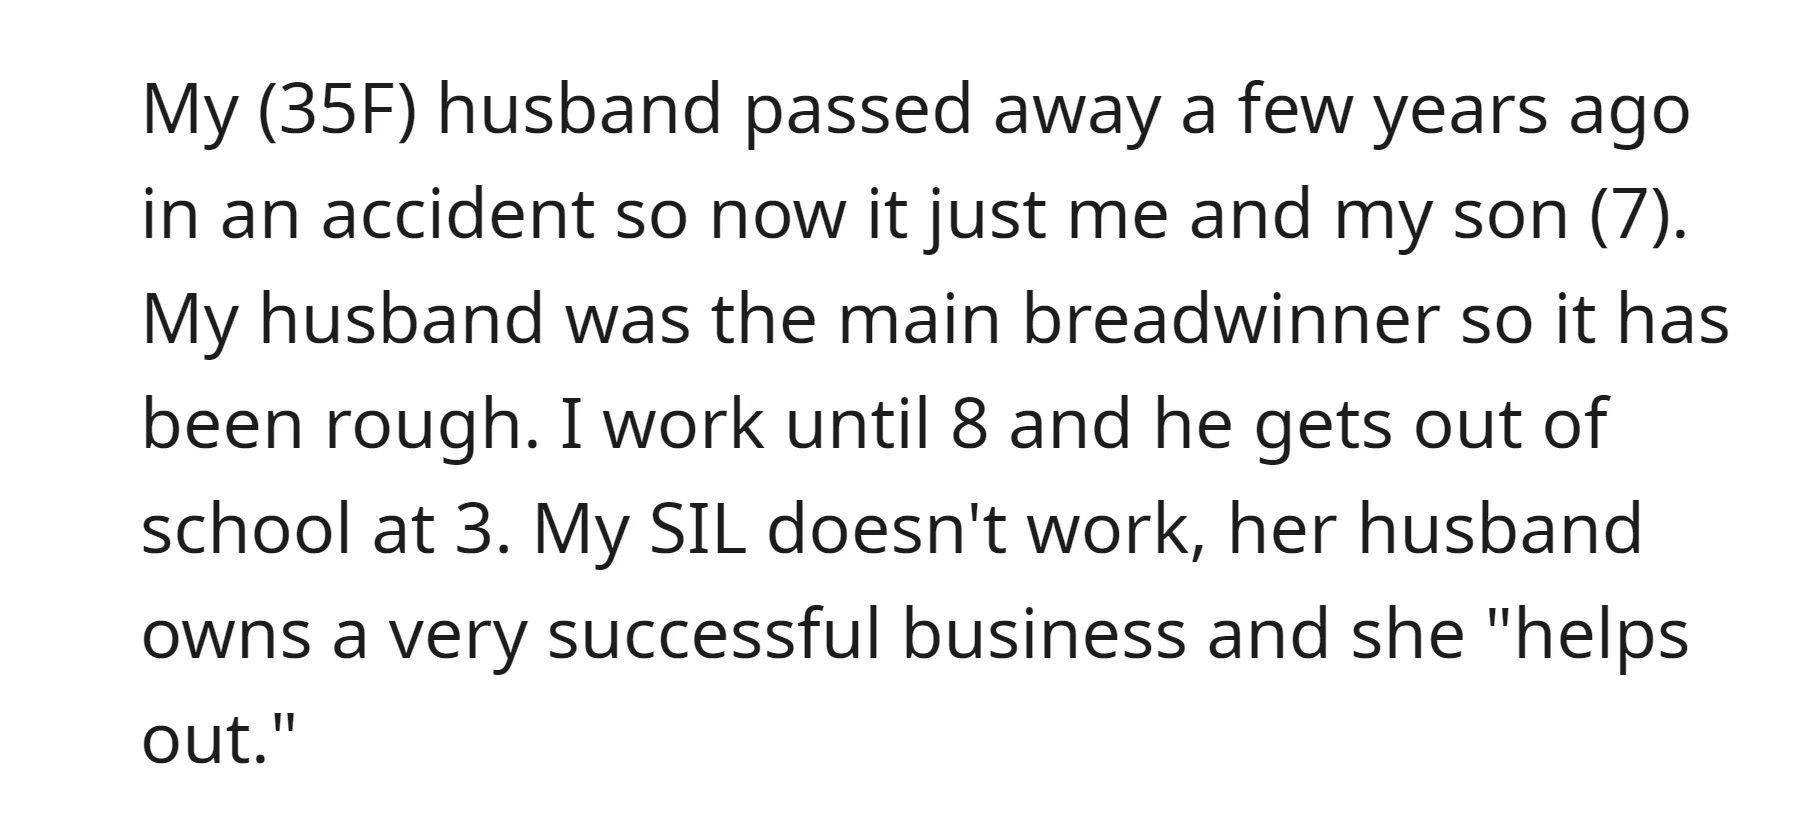 OP is a widow struggling financially as the sole provider for her son